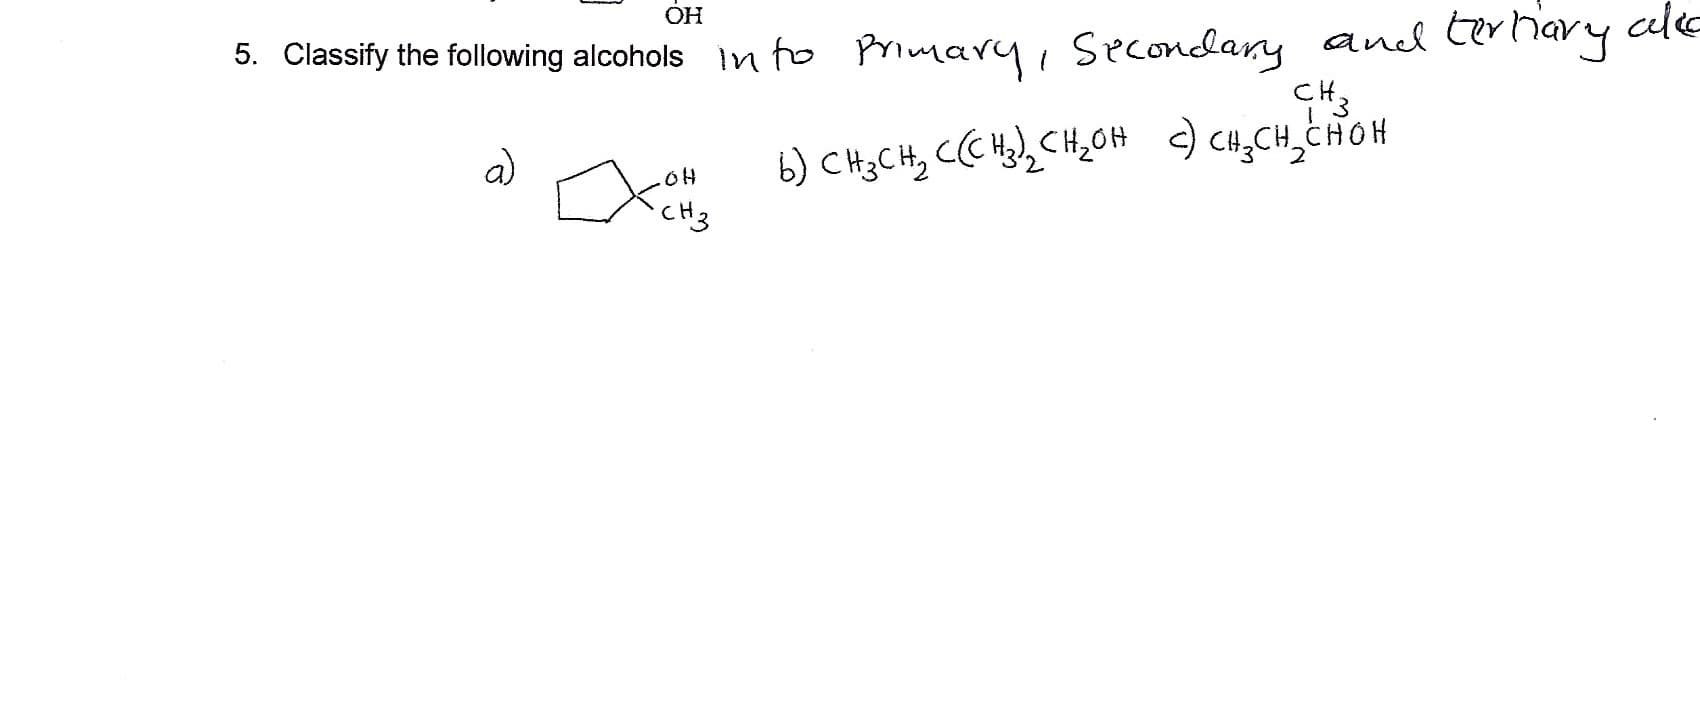 OH
5. Classify the following alcohols n fo PMimary Secondlany and Crhavy cl
CHCHCHOH
b CH3CH CC2CH2OH
CH3
a)
oH
